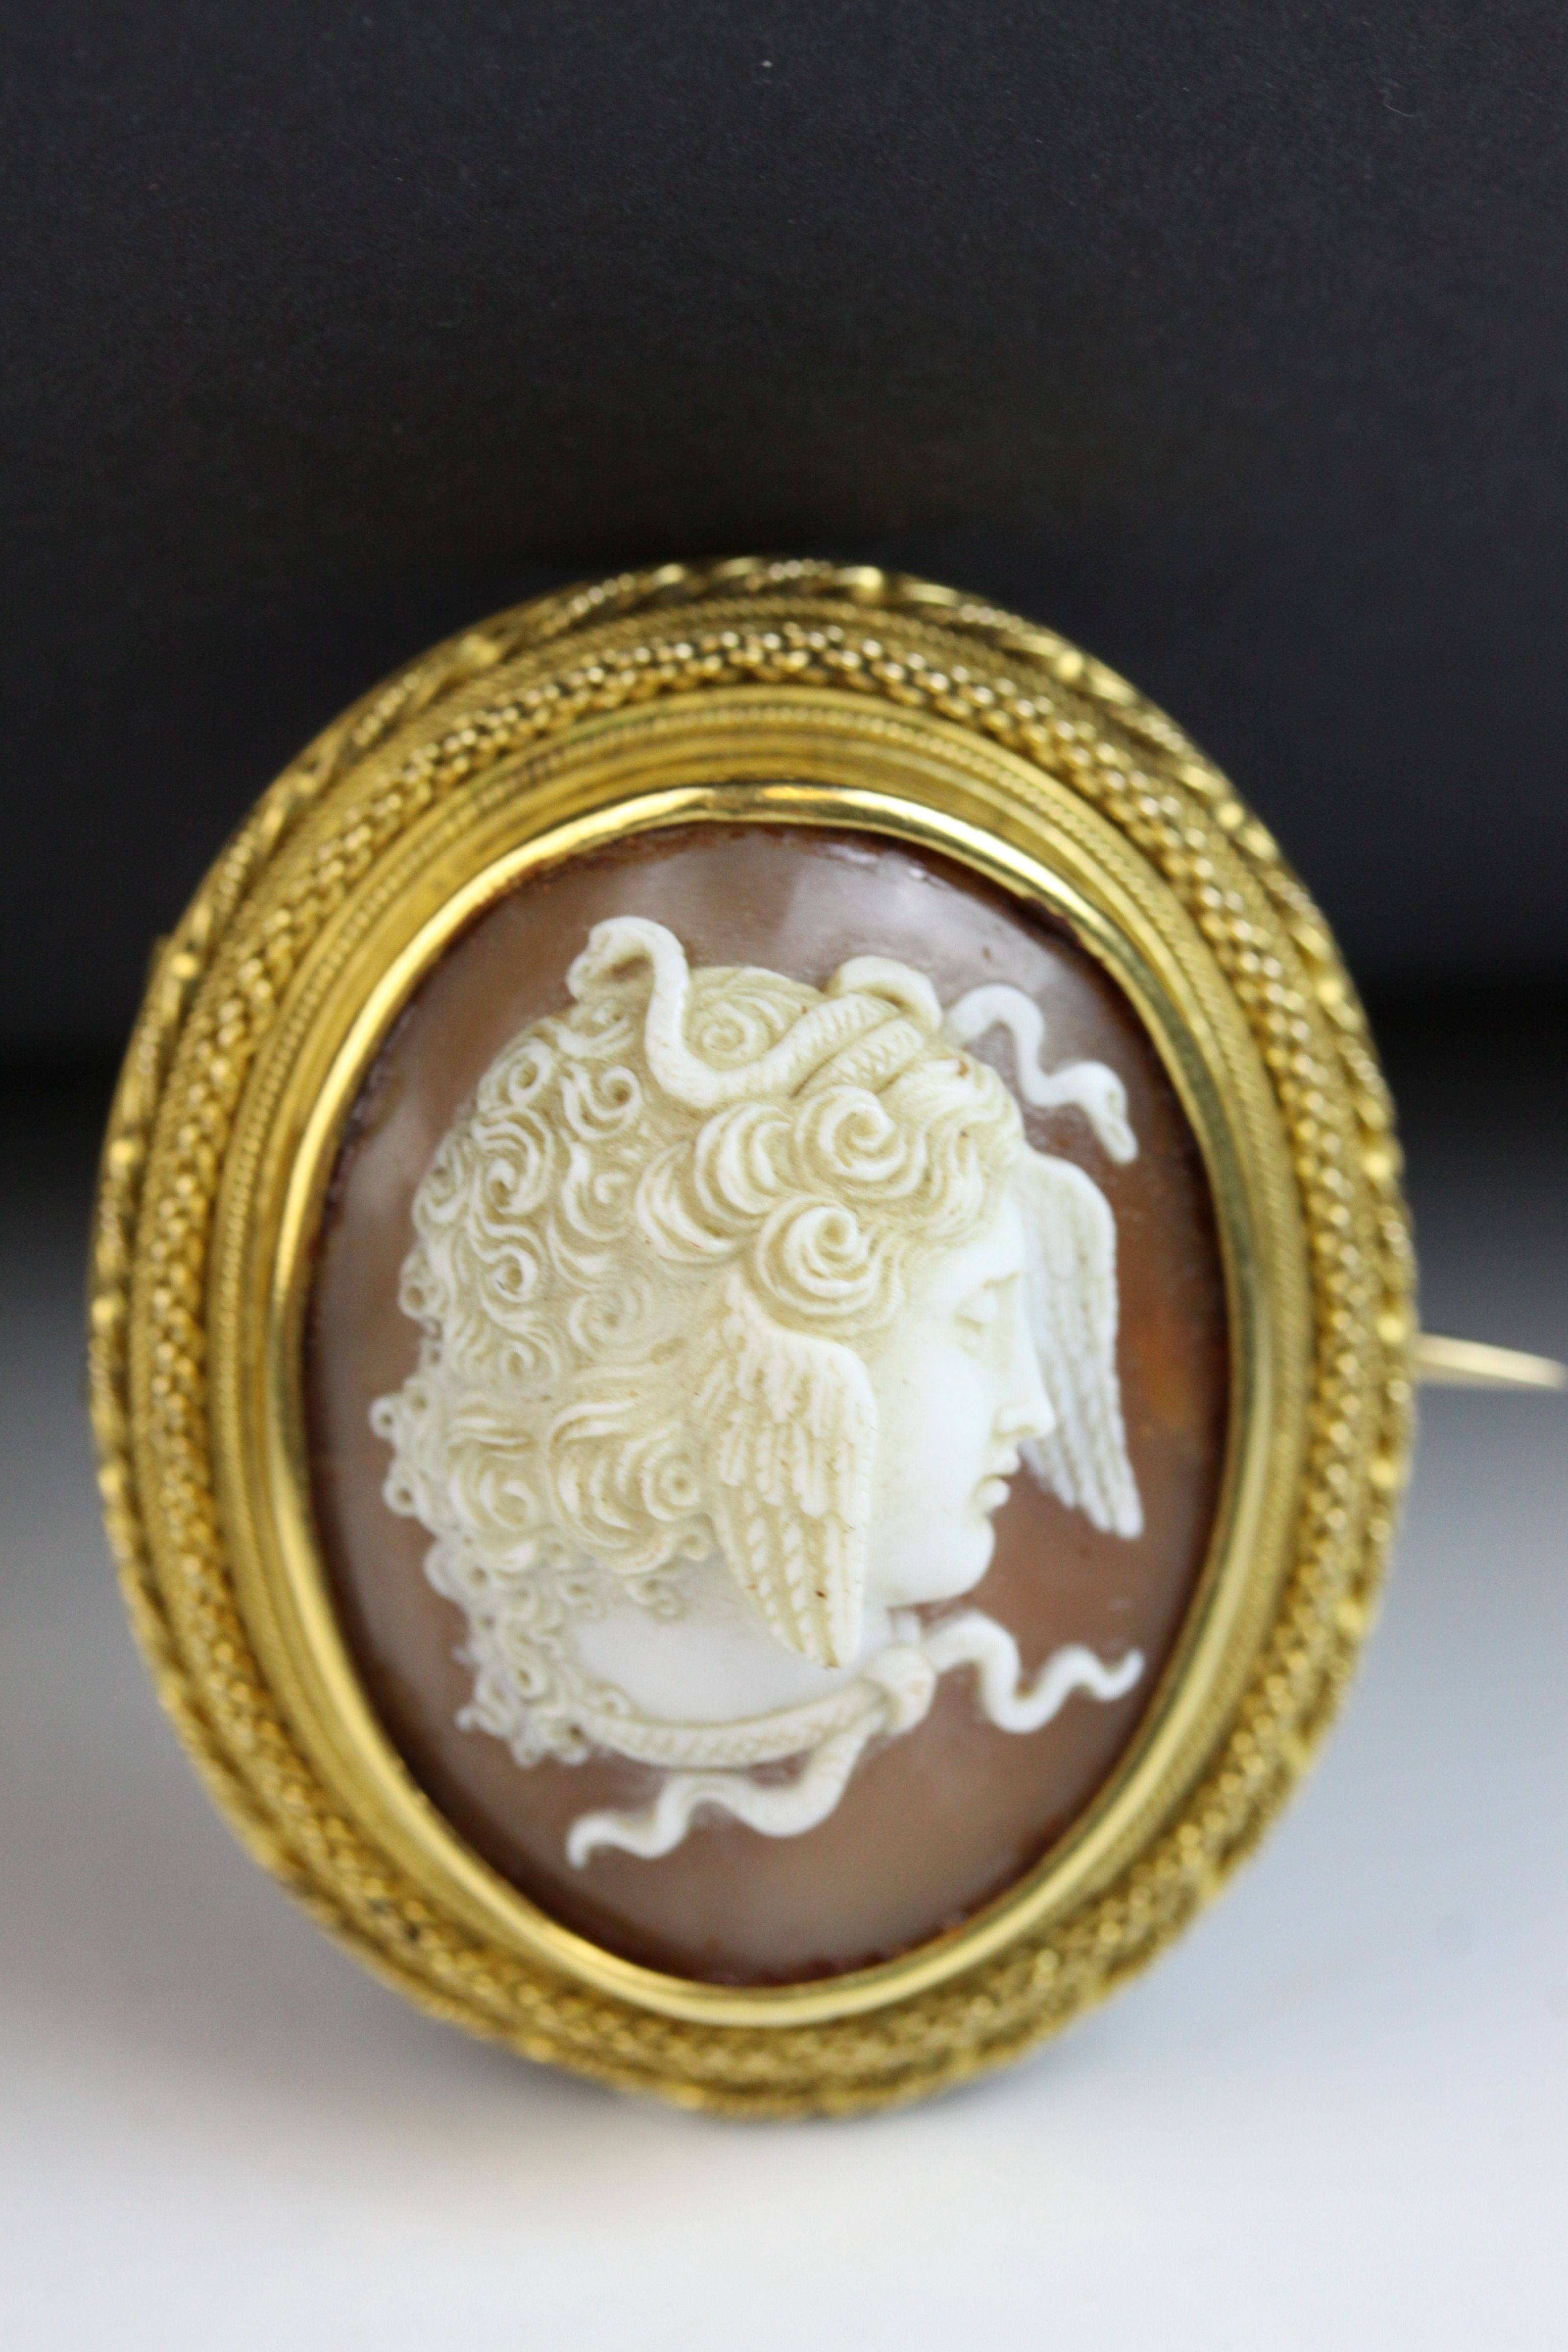 Victorian shell cameo yellow gold brooch depicting Medusa, rub over setting, fancy rope twist and - Image 2 of 6